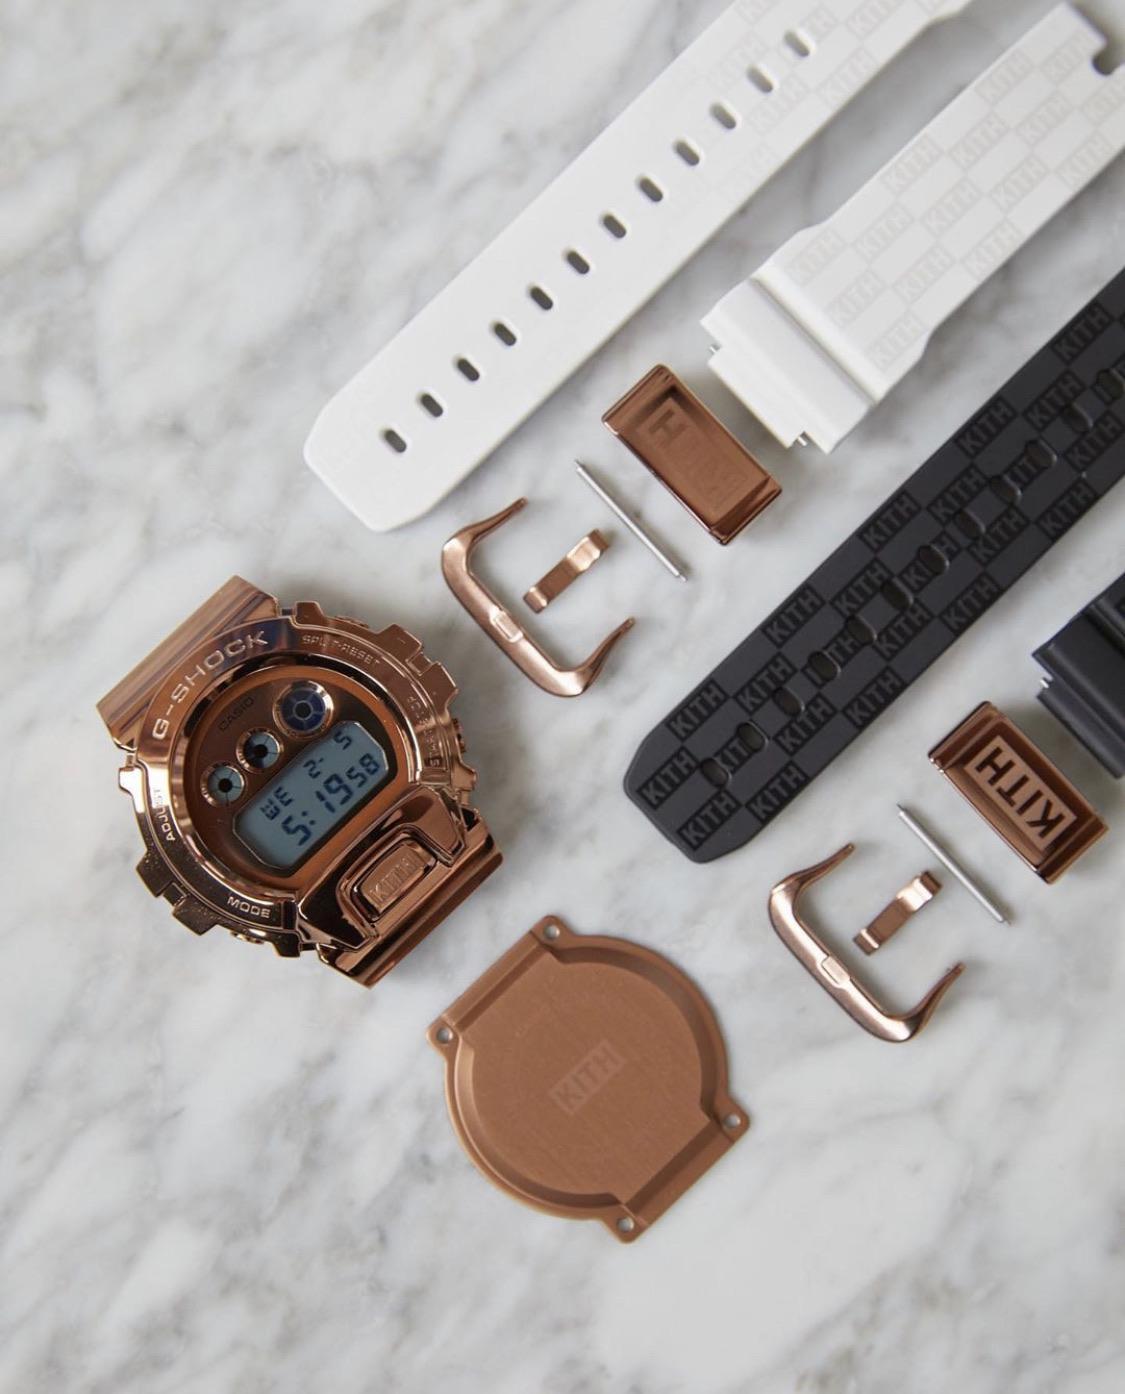 Kith x G-Shock Limited Edition Collaboration – G Shock New Zealand